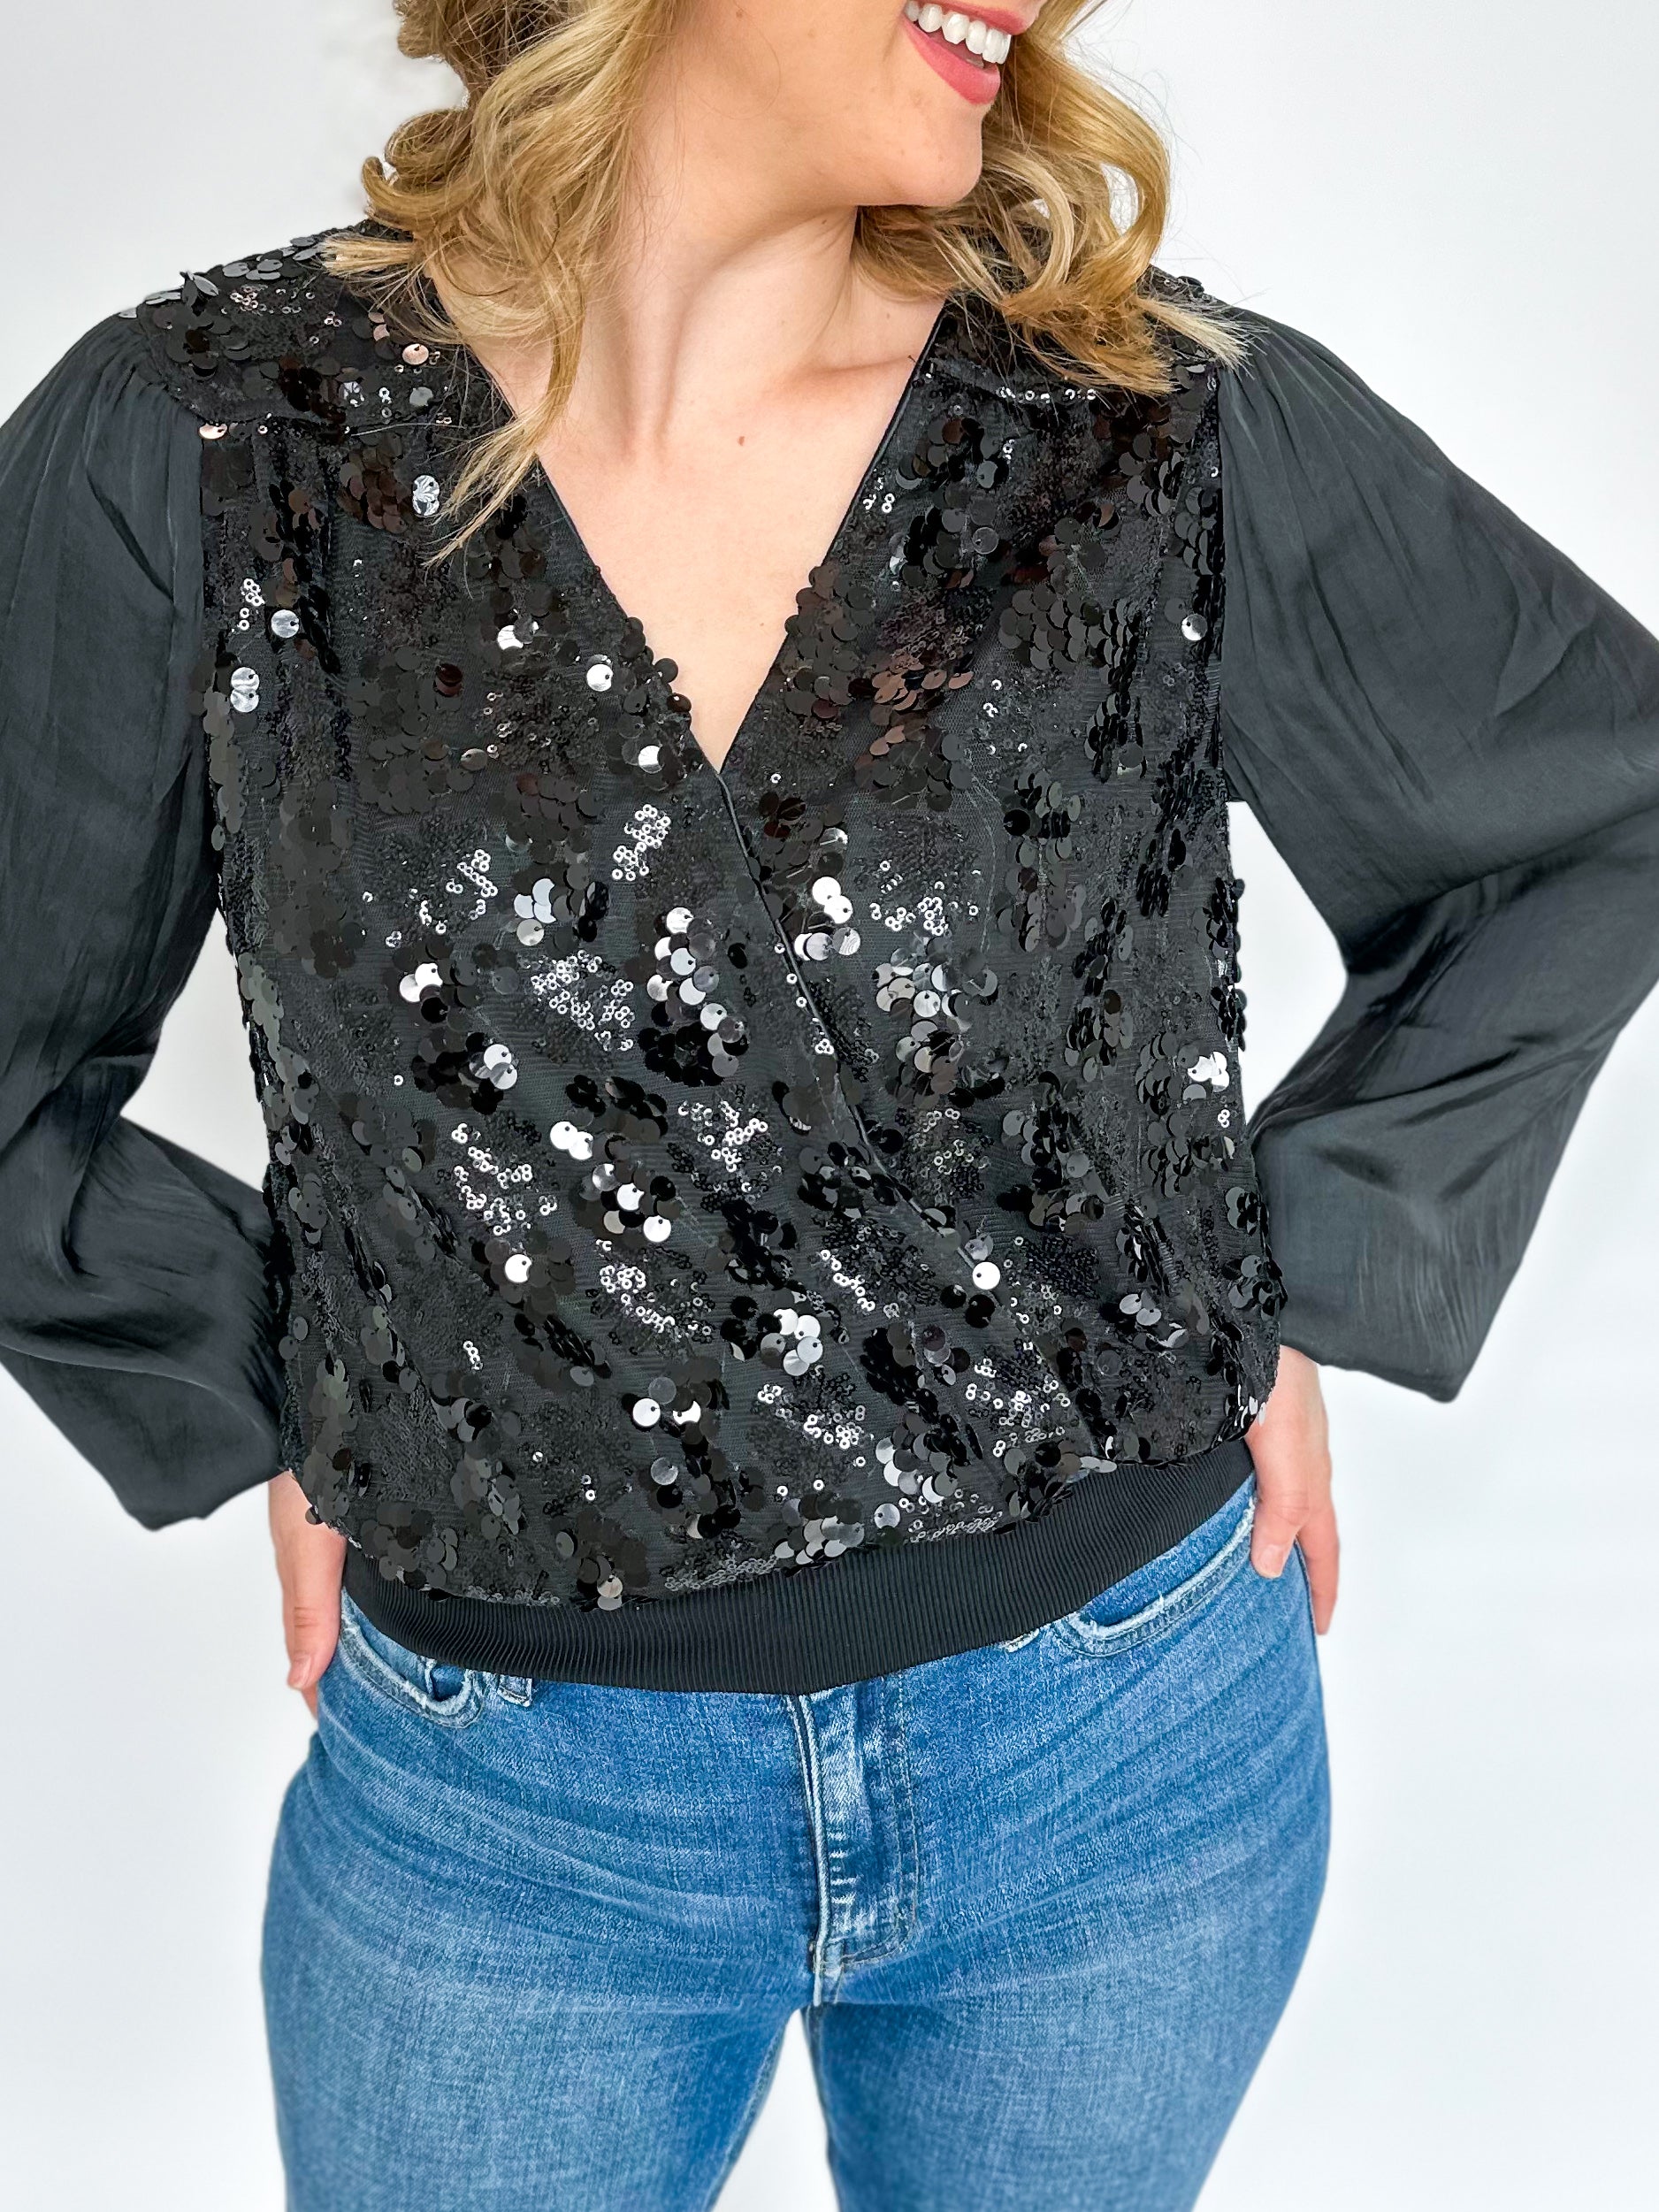 Life Of The Party Blouse-200 Fashion Blouses-CURRENT AIR CLOTHING-July & June Women's Fashion Boutique Located in San Antonio, Texas